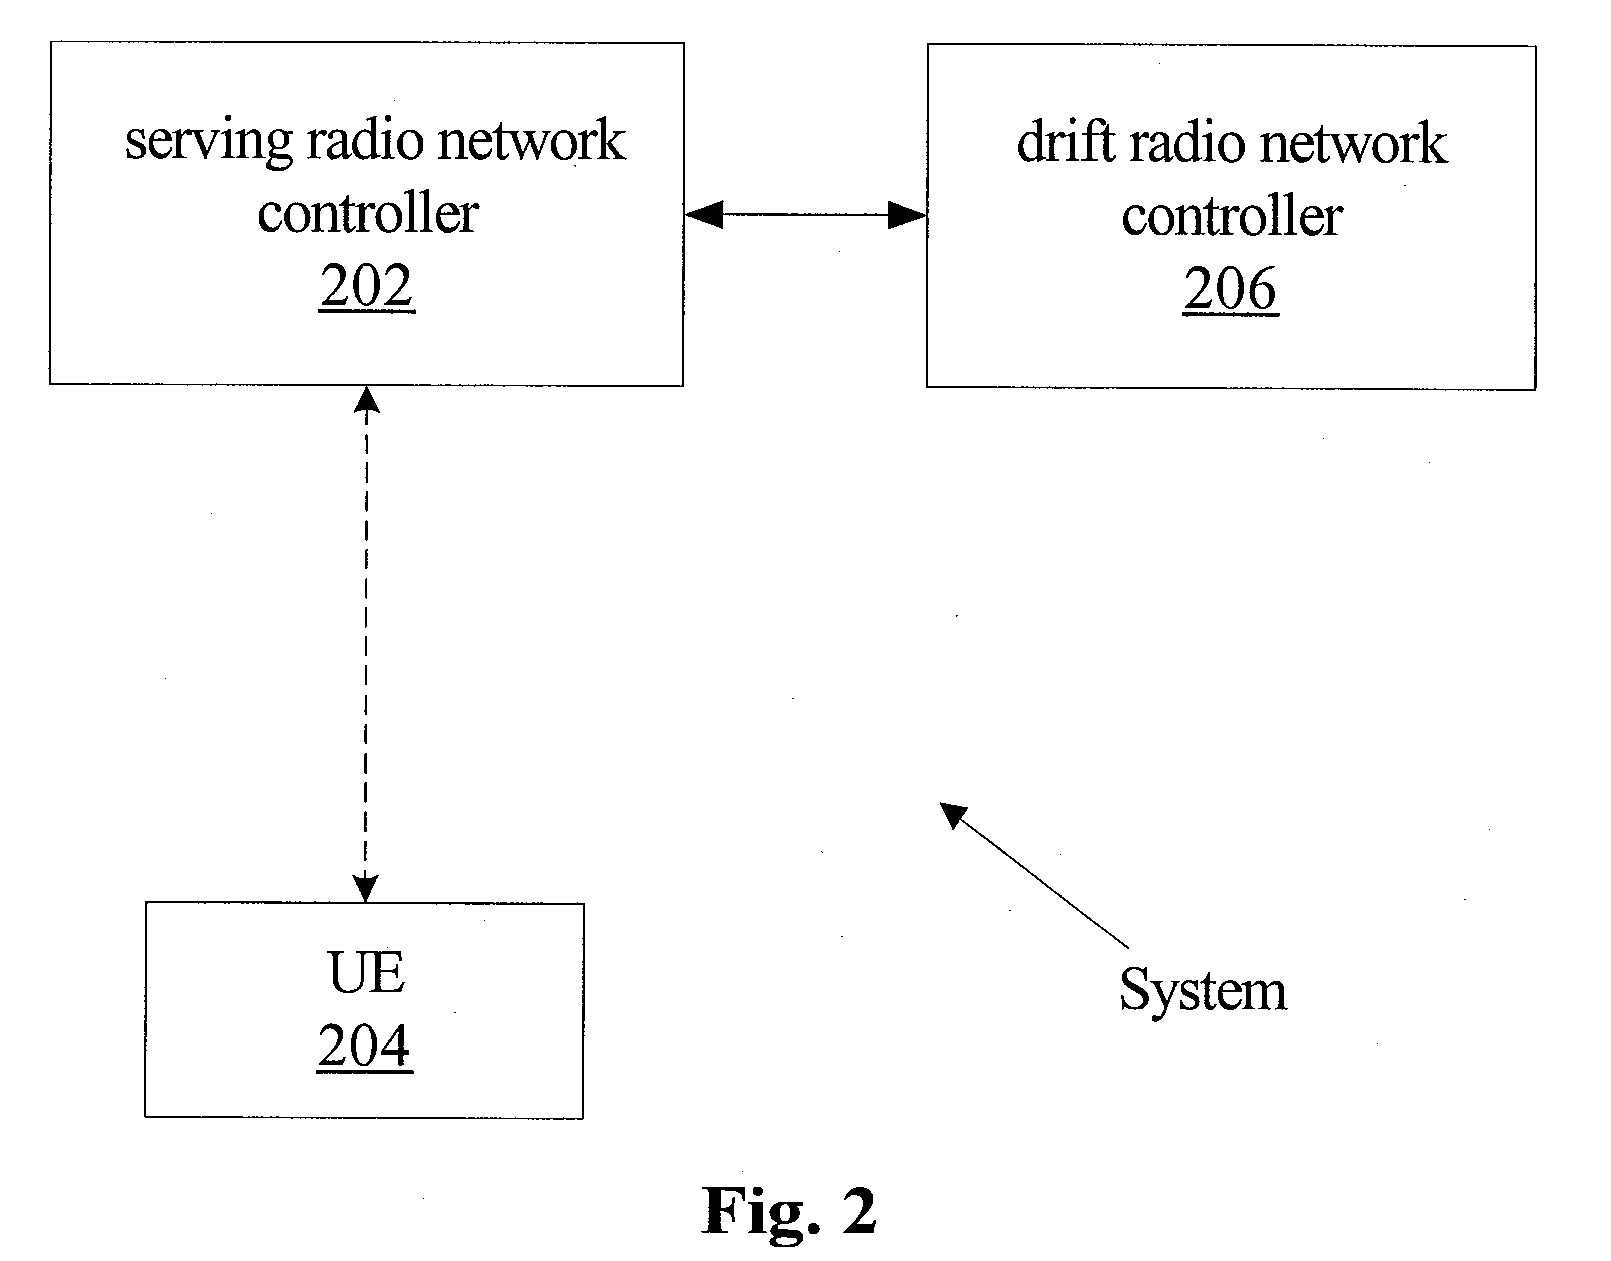 Method and system for acquiring continuous packet connectivity technology support capability information